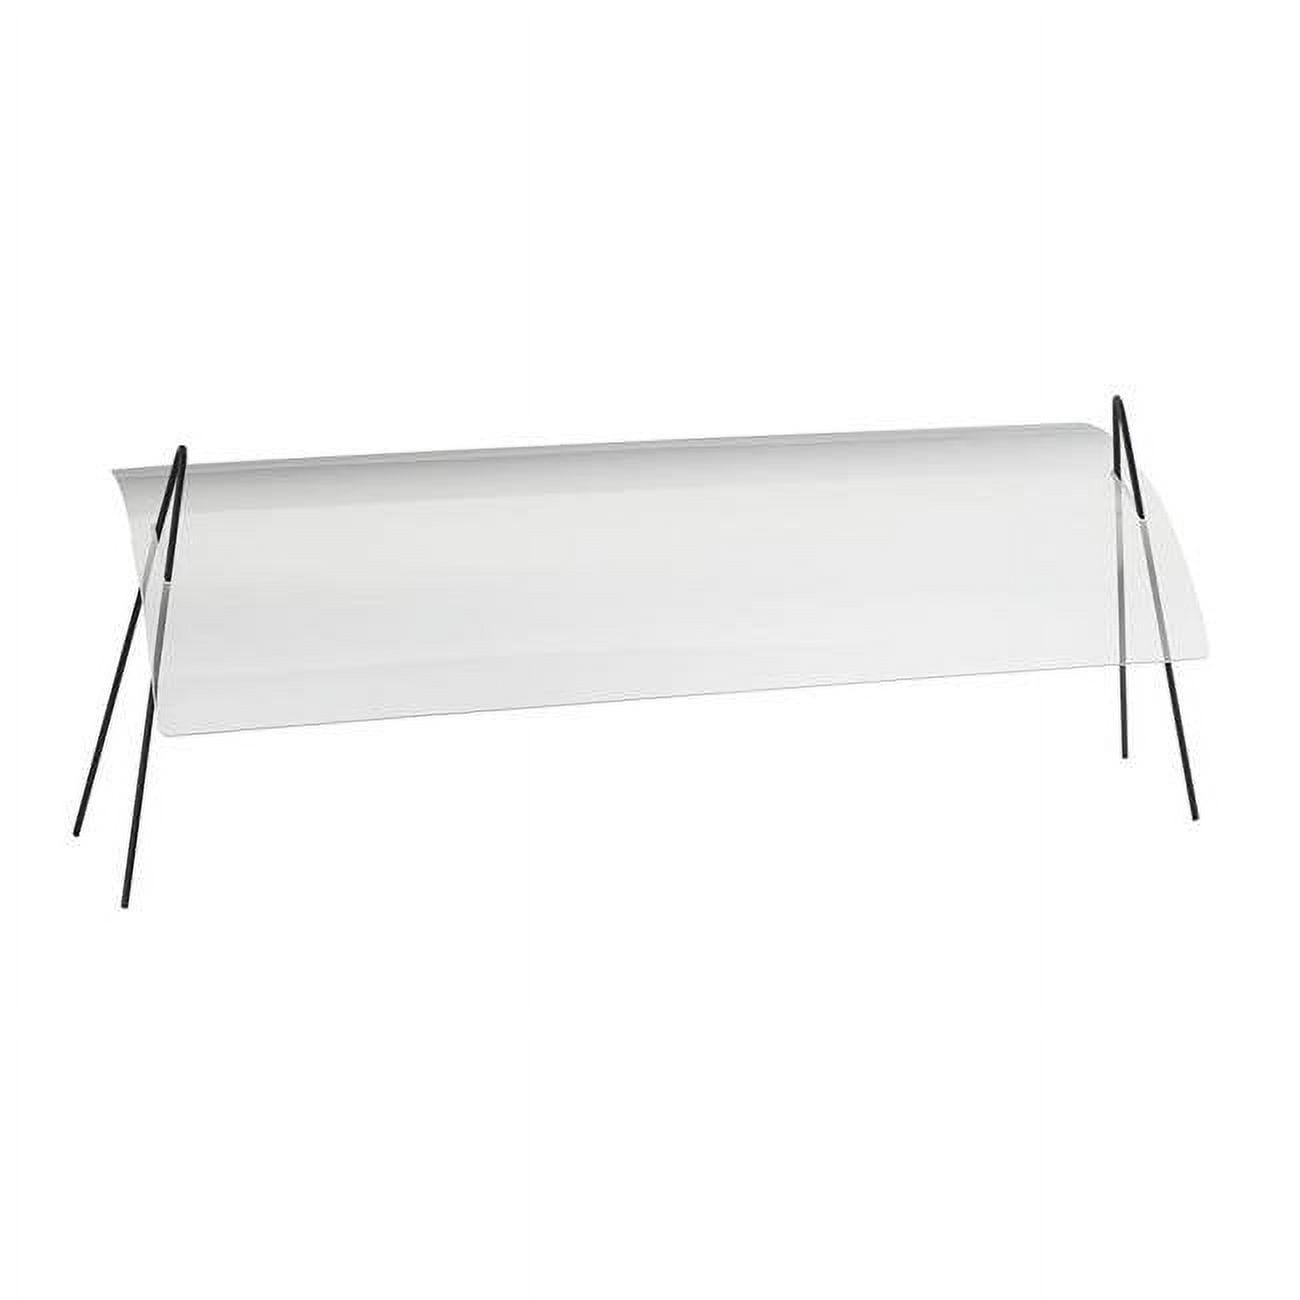 Picture of Cal Mil 1458-72 Acrylic Rectangular Sneeze Guard with Black Iron Wire Frame - 72 x 17.25 x 19 in.